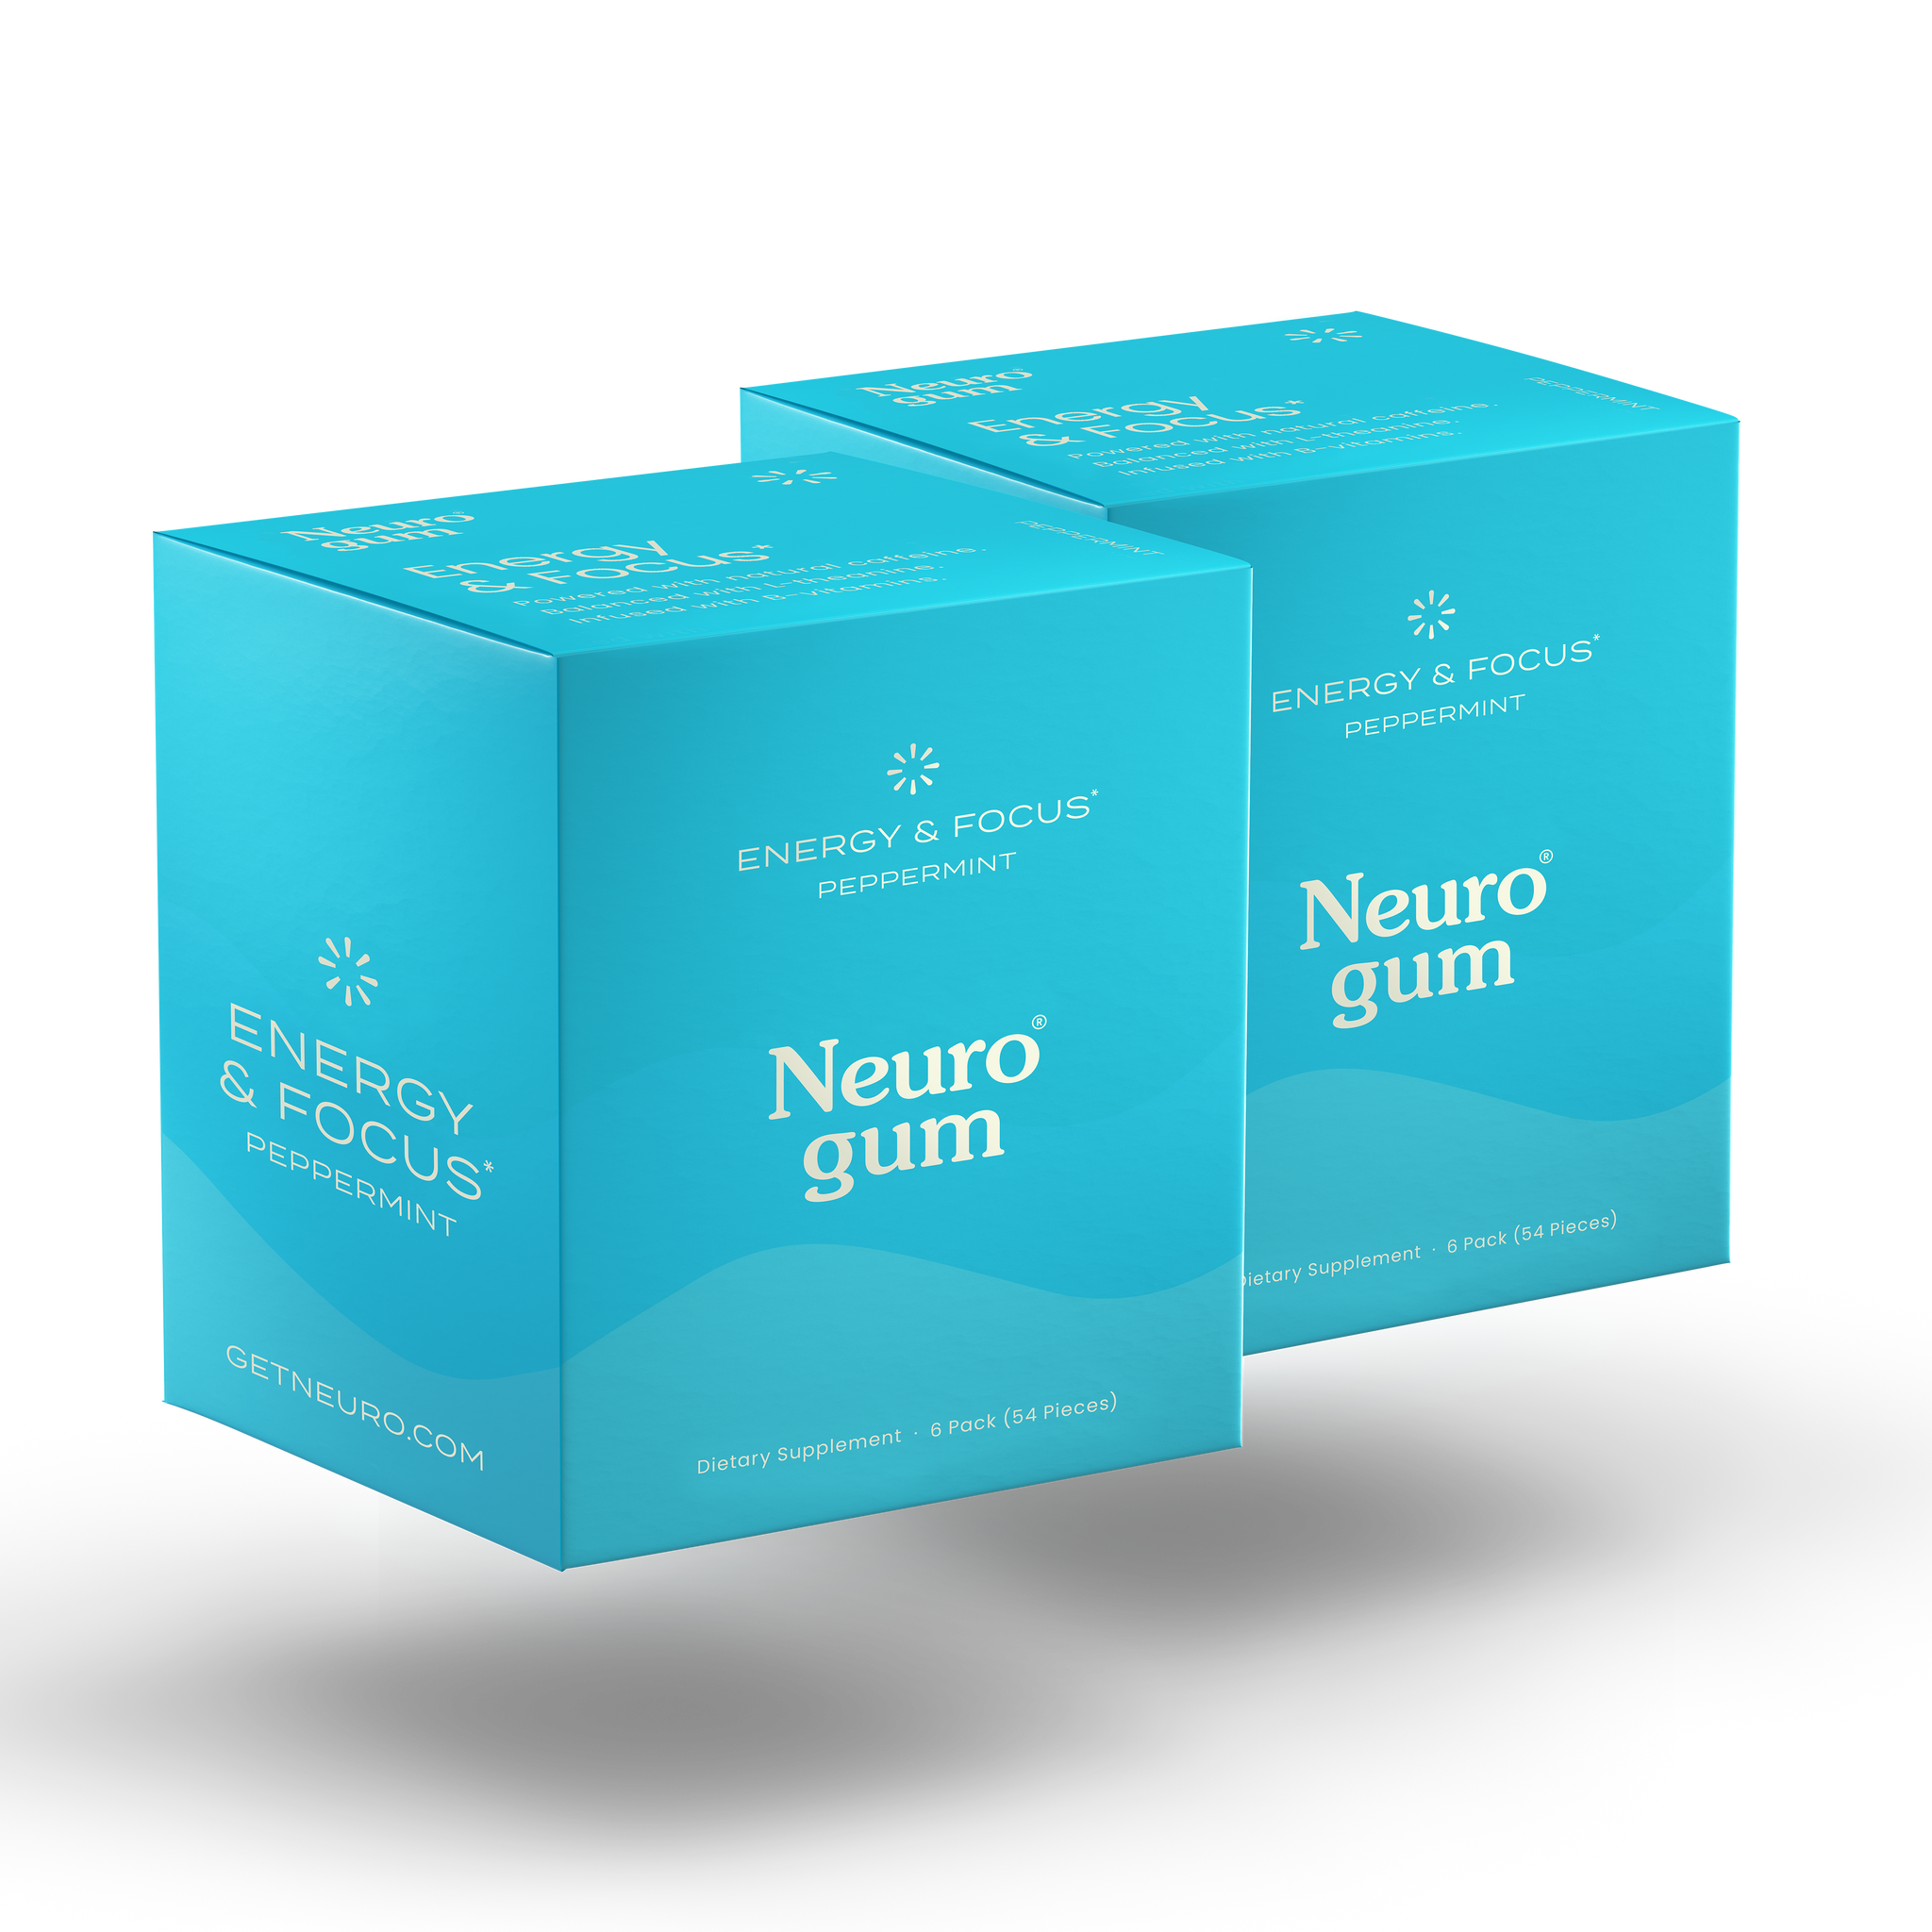 Energy and Focus Gum by Neuro